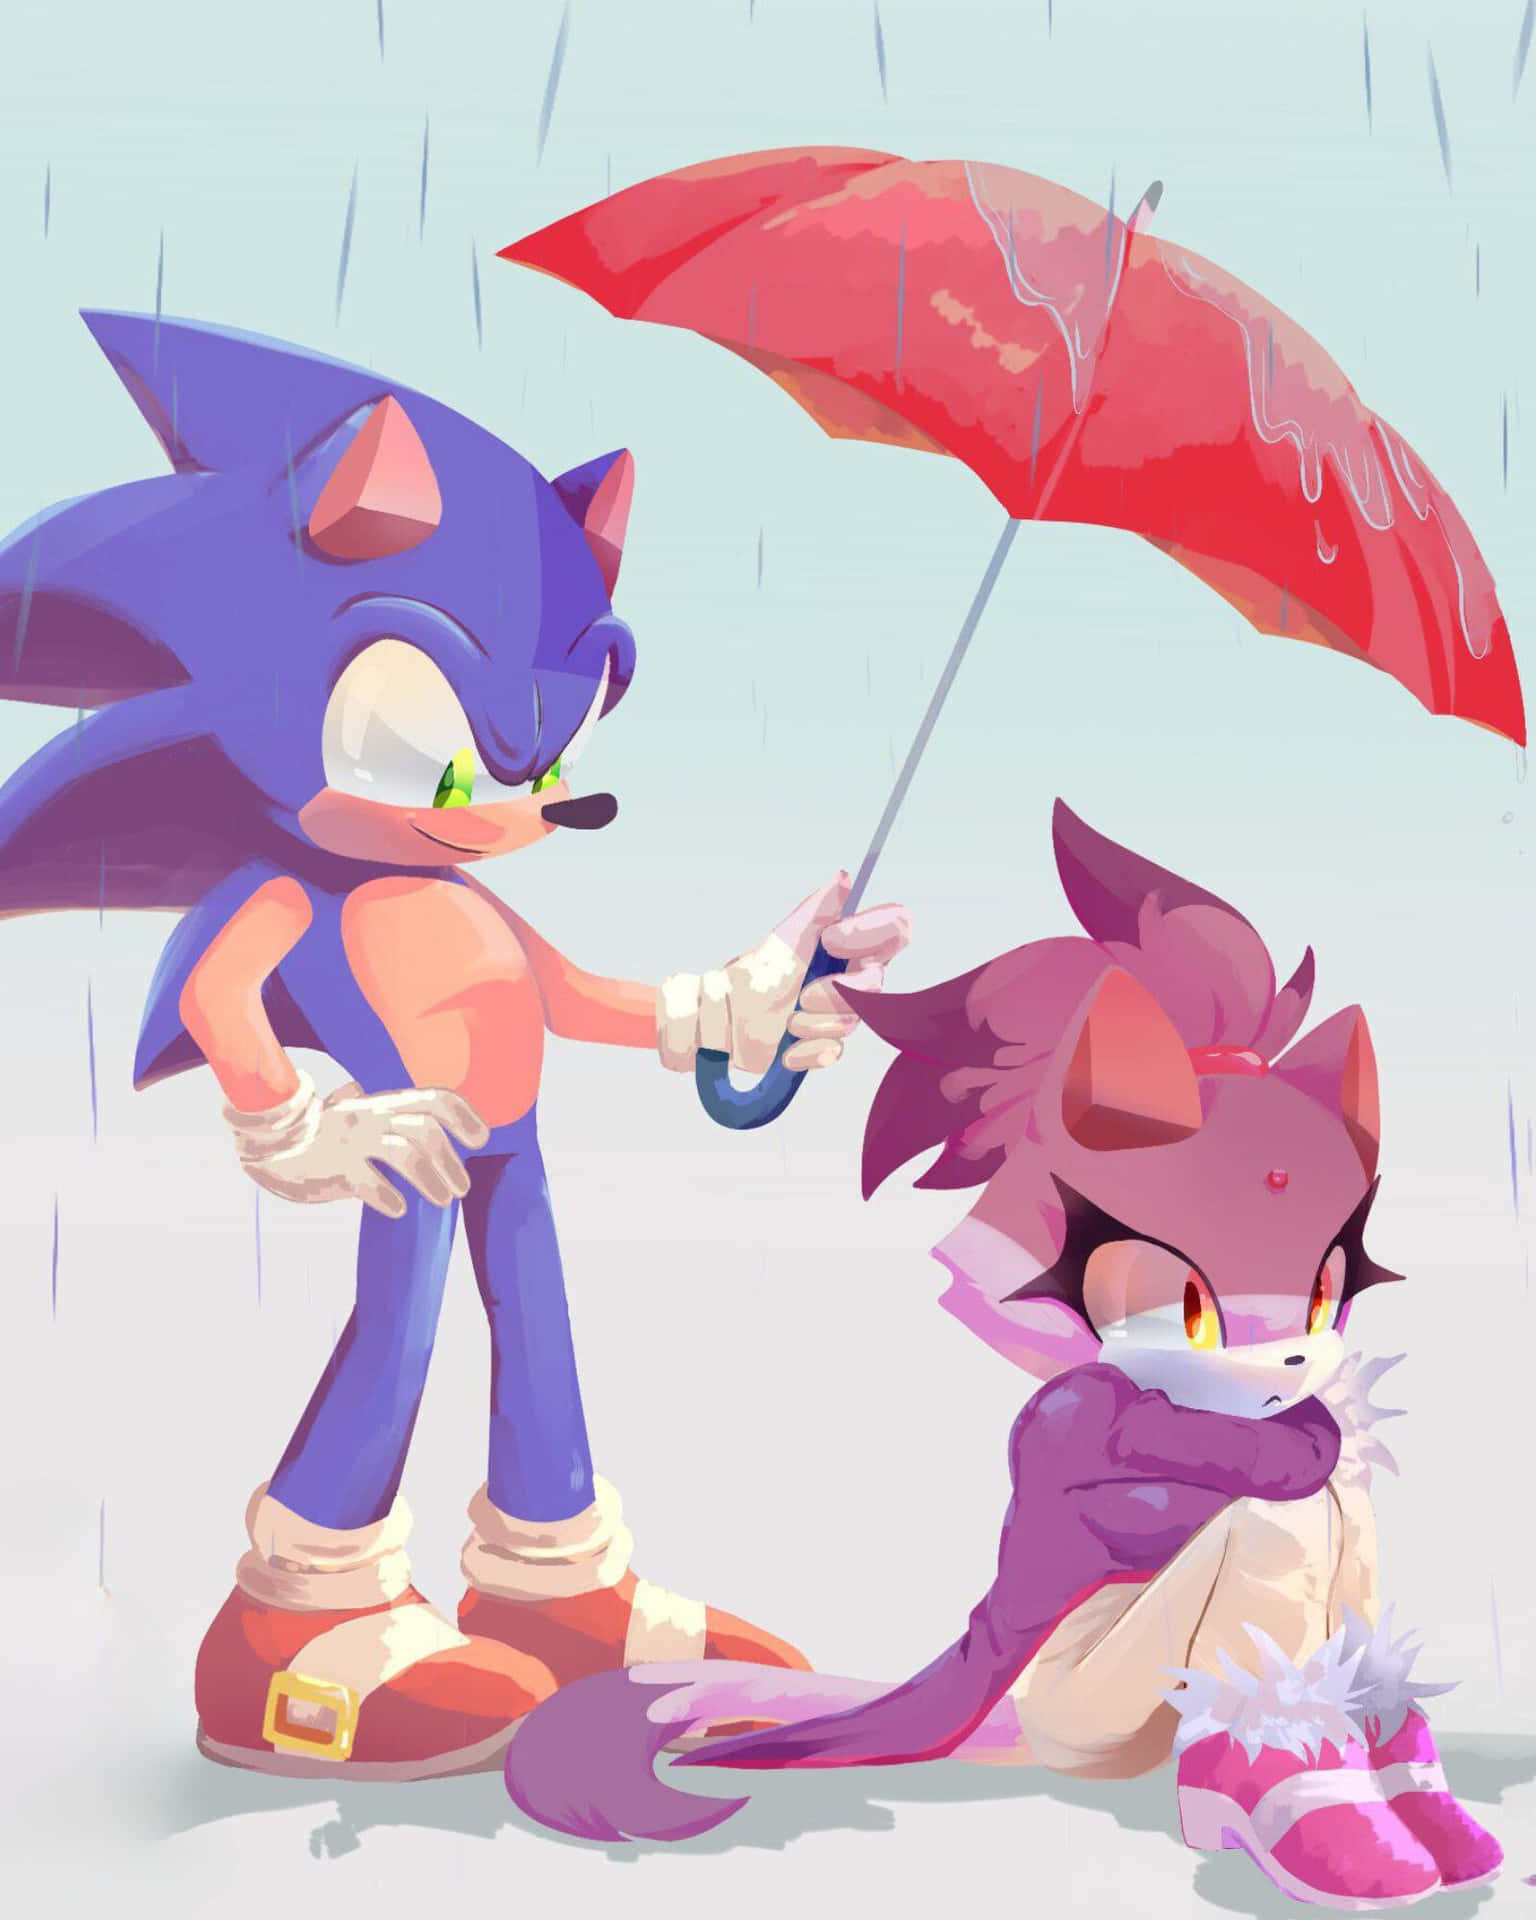 Sonic and Blaze: Racing Through an Adventure Together Wallpaper